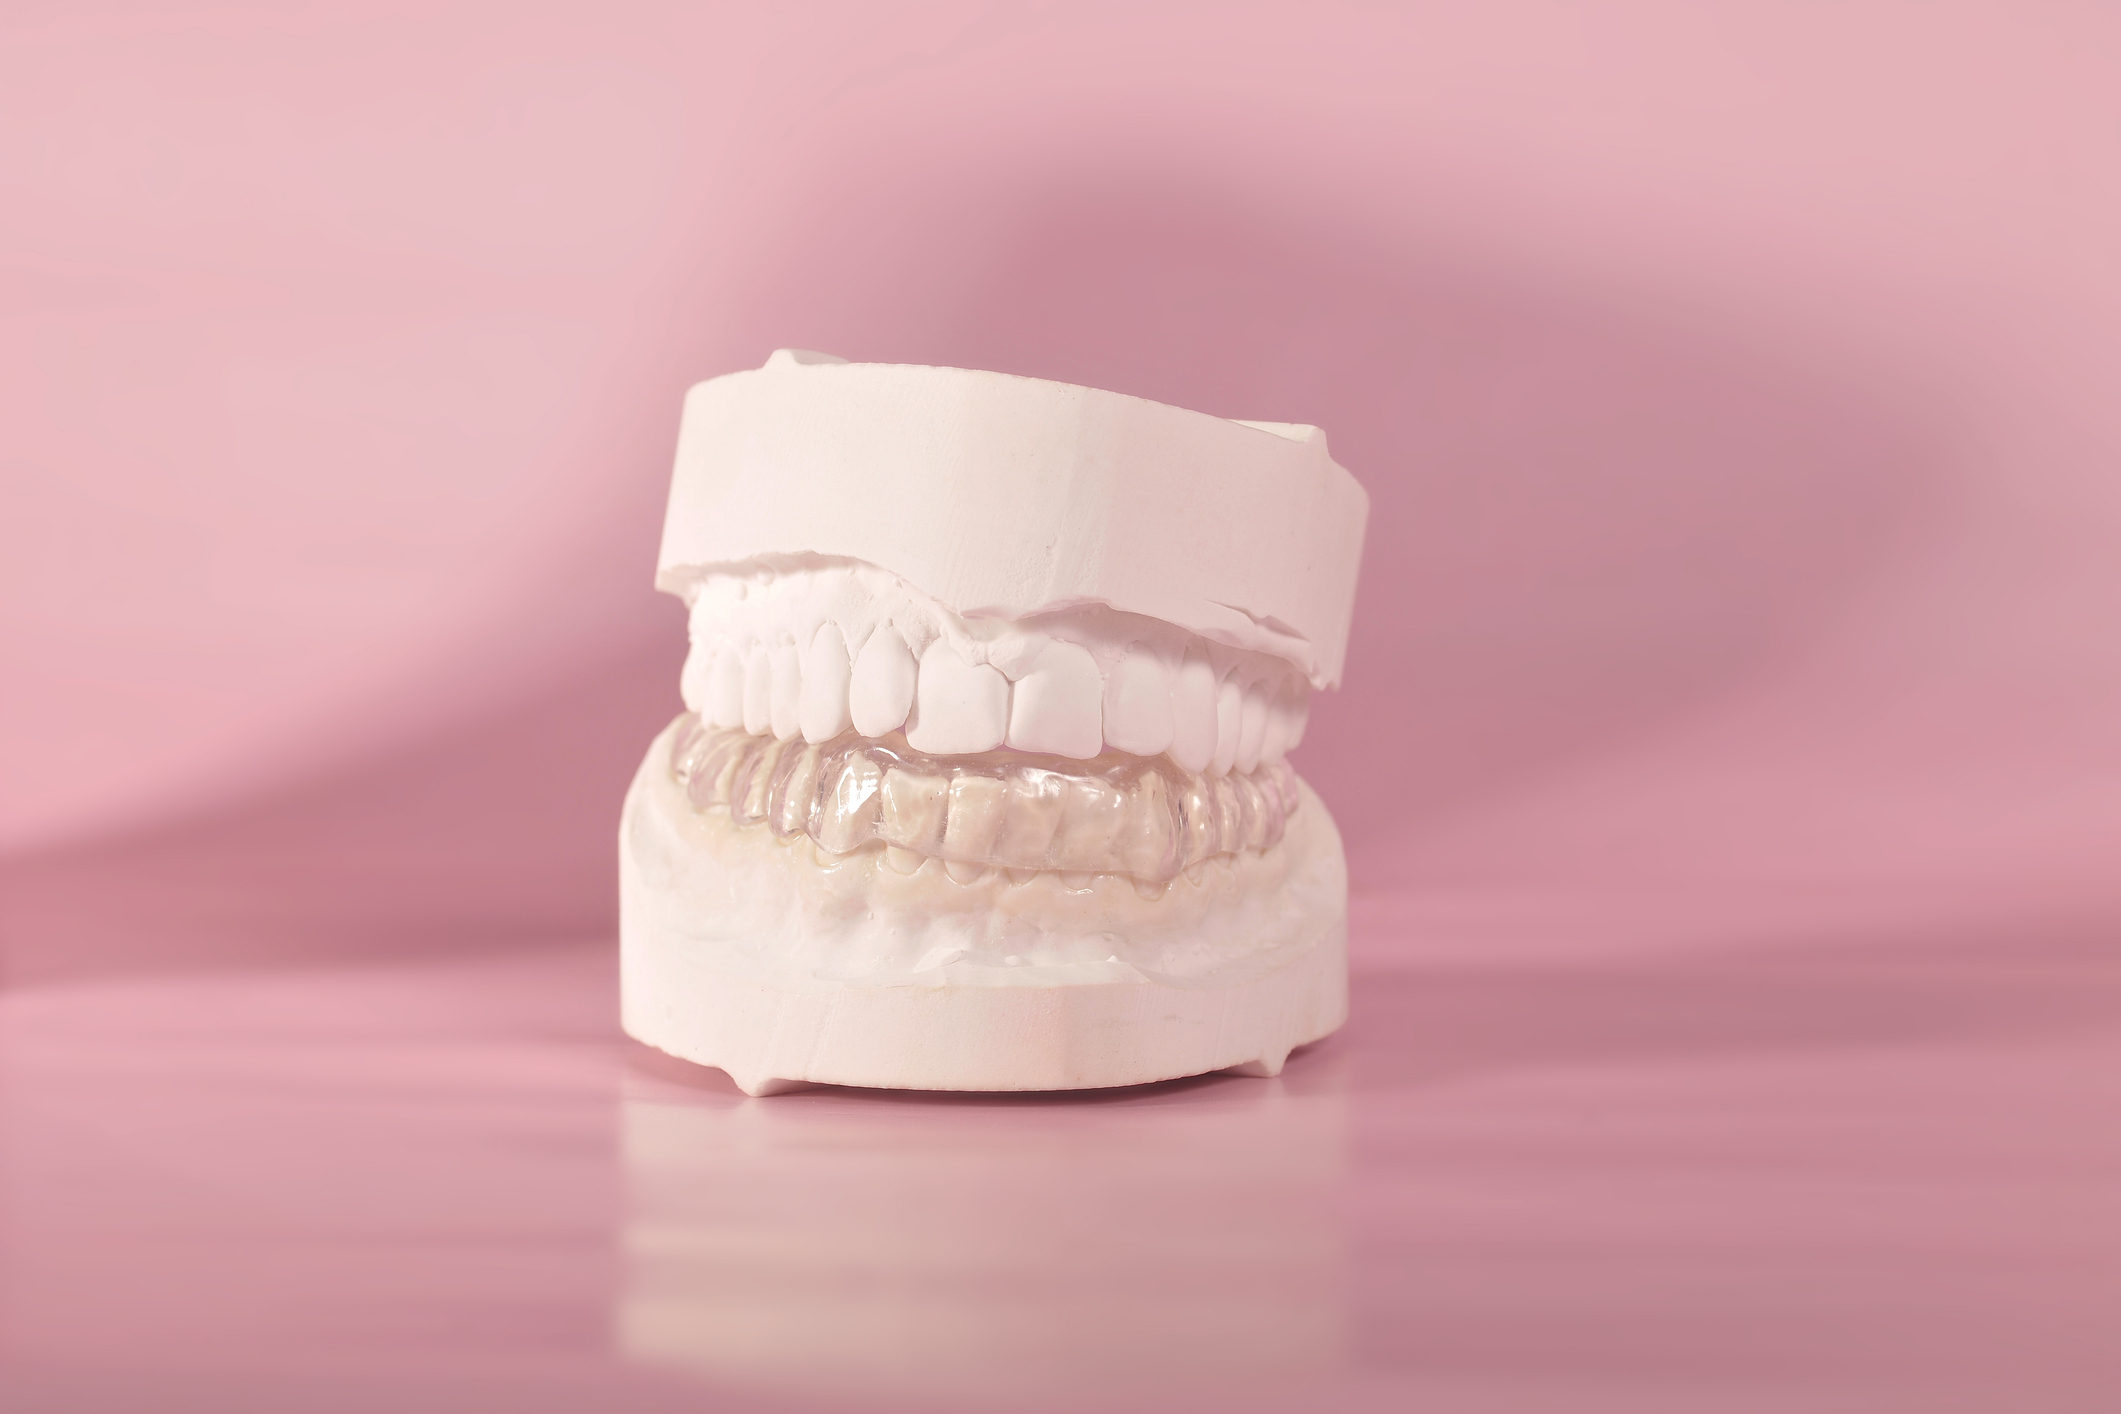 A dental mold of upper and lower teeth set against a pink backdrop